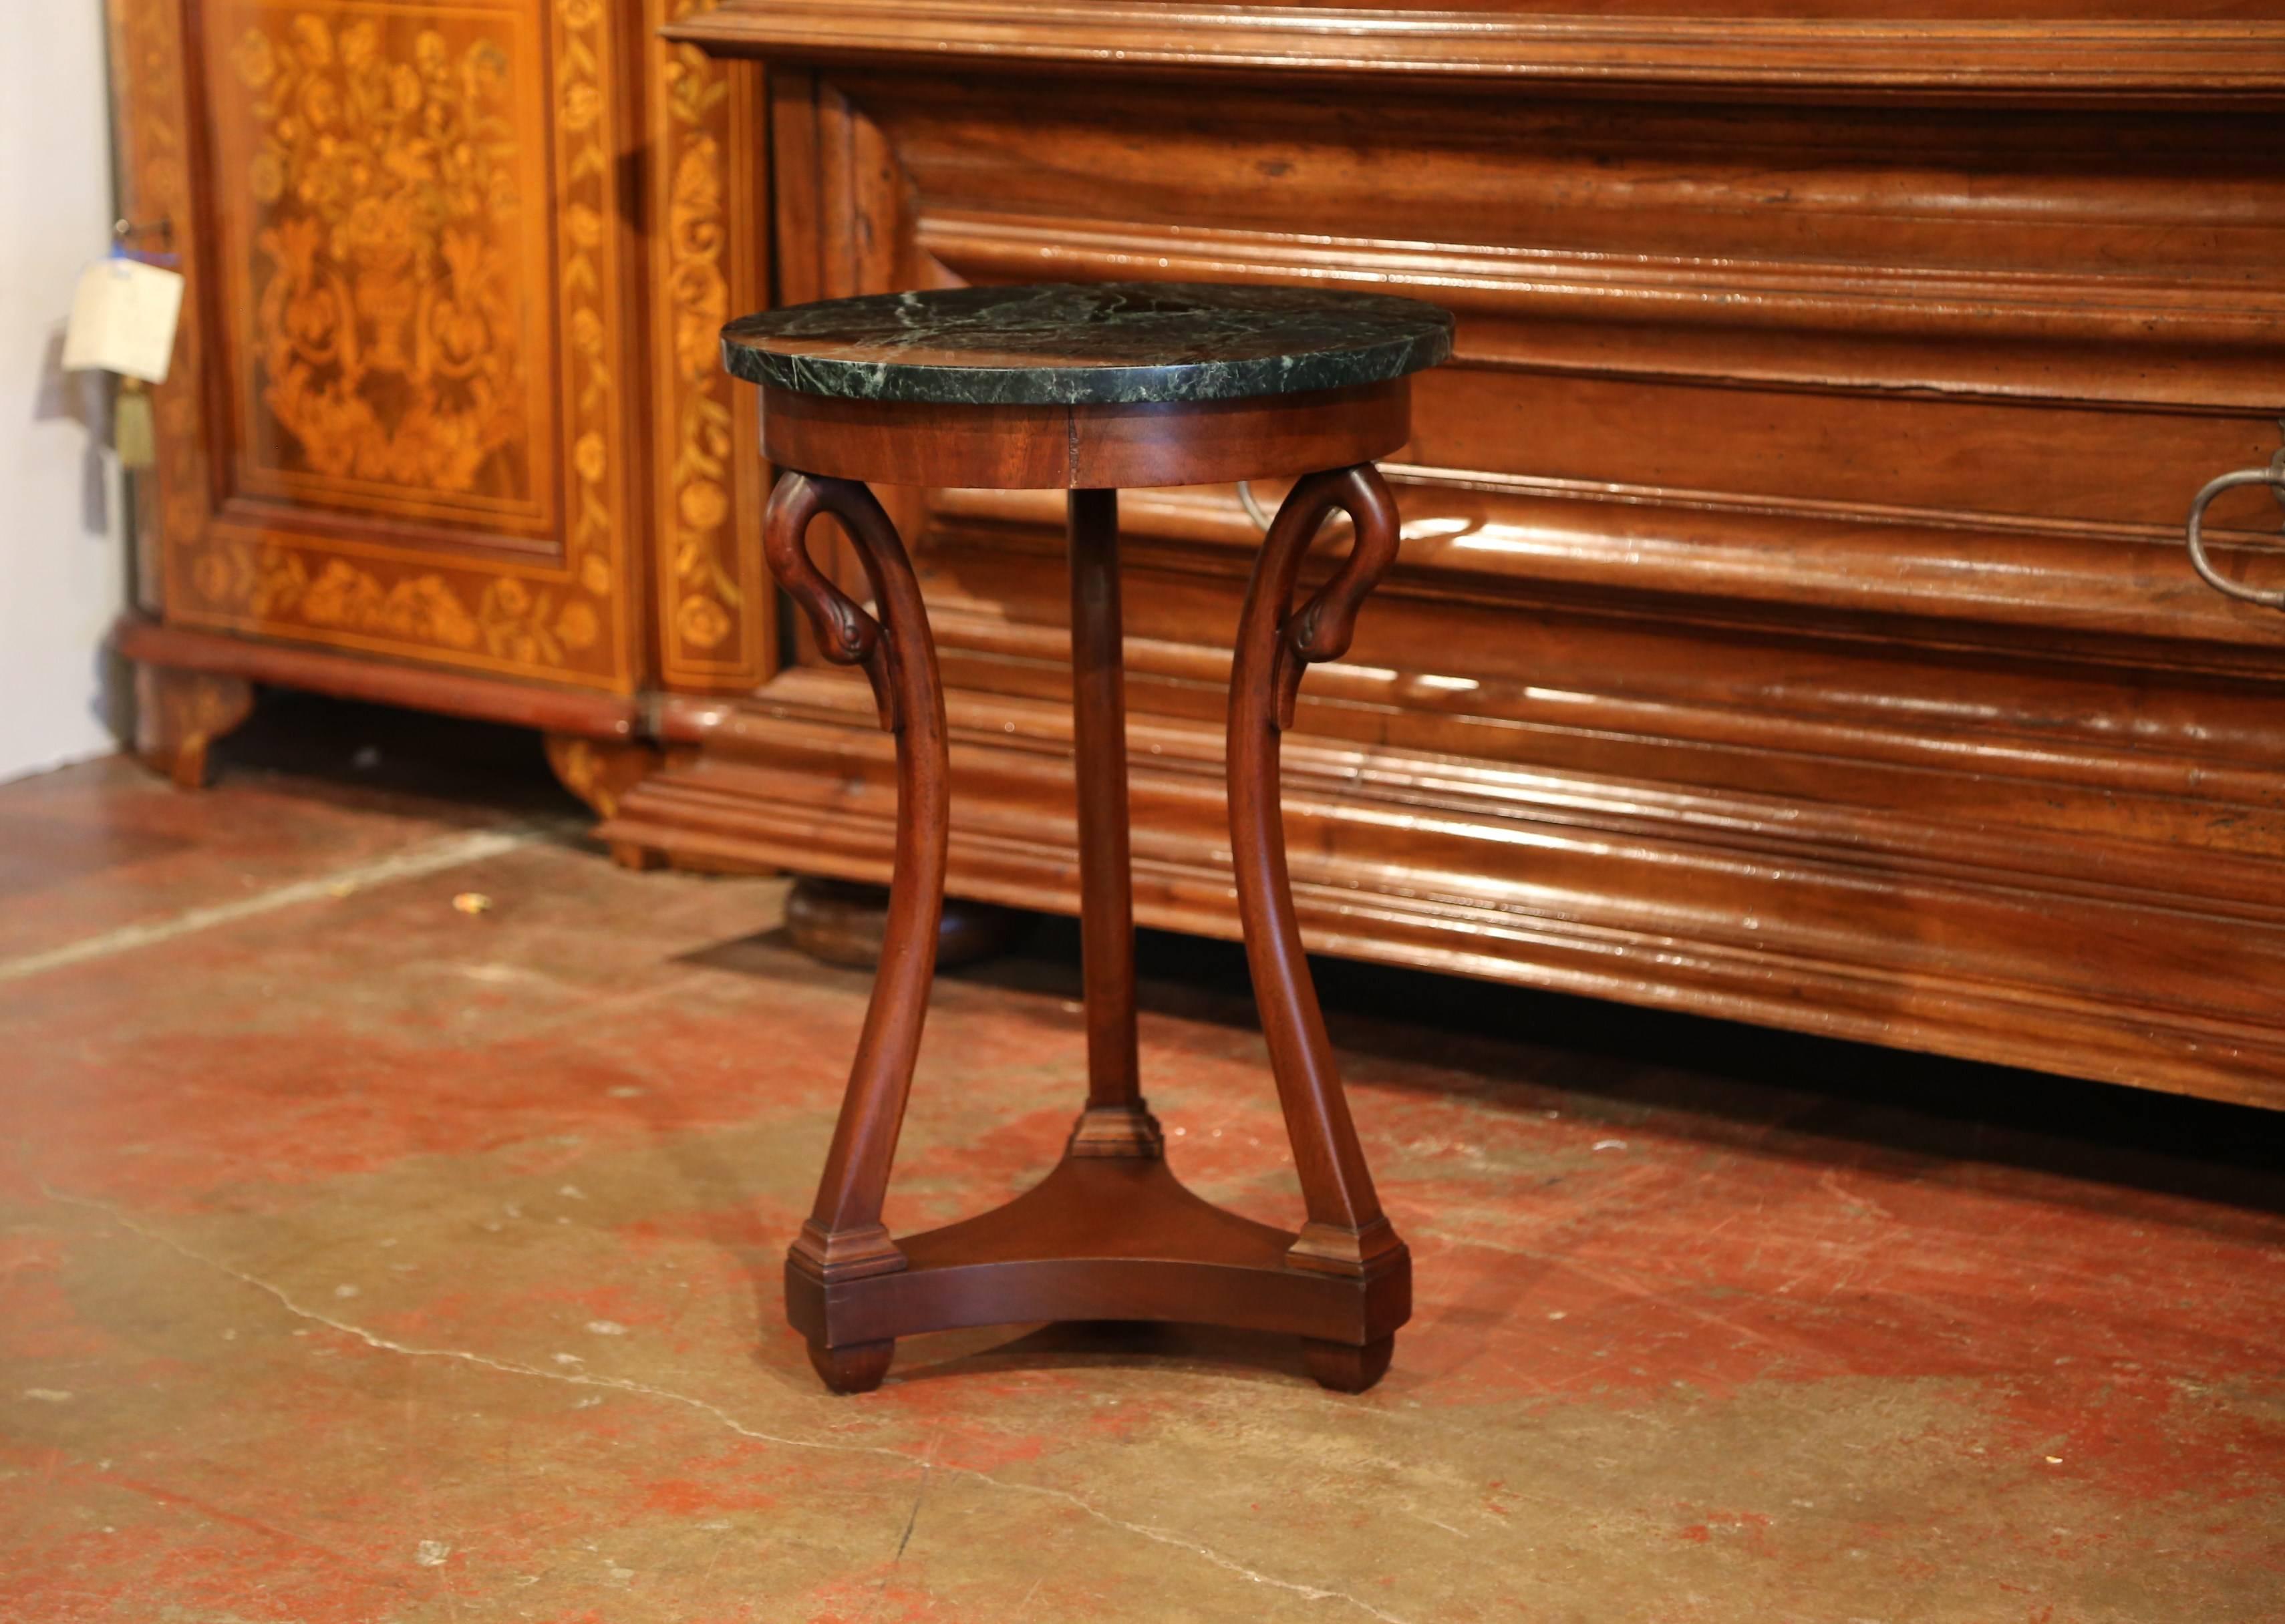 Elegant antique pedestal table from Paris, France; crafted circa 1920, the fruit wood table features three legs with swan head and neck decor over a bottom stretcher; the table is embellished by a round dark green marble top. The delicate end table